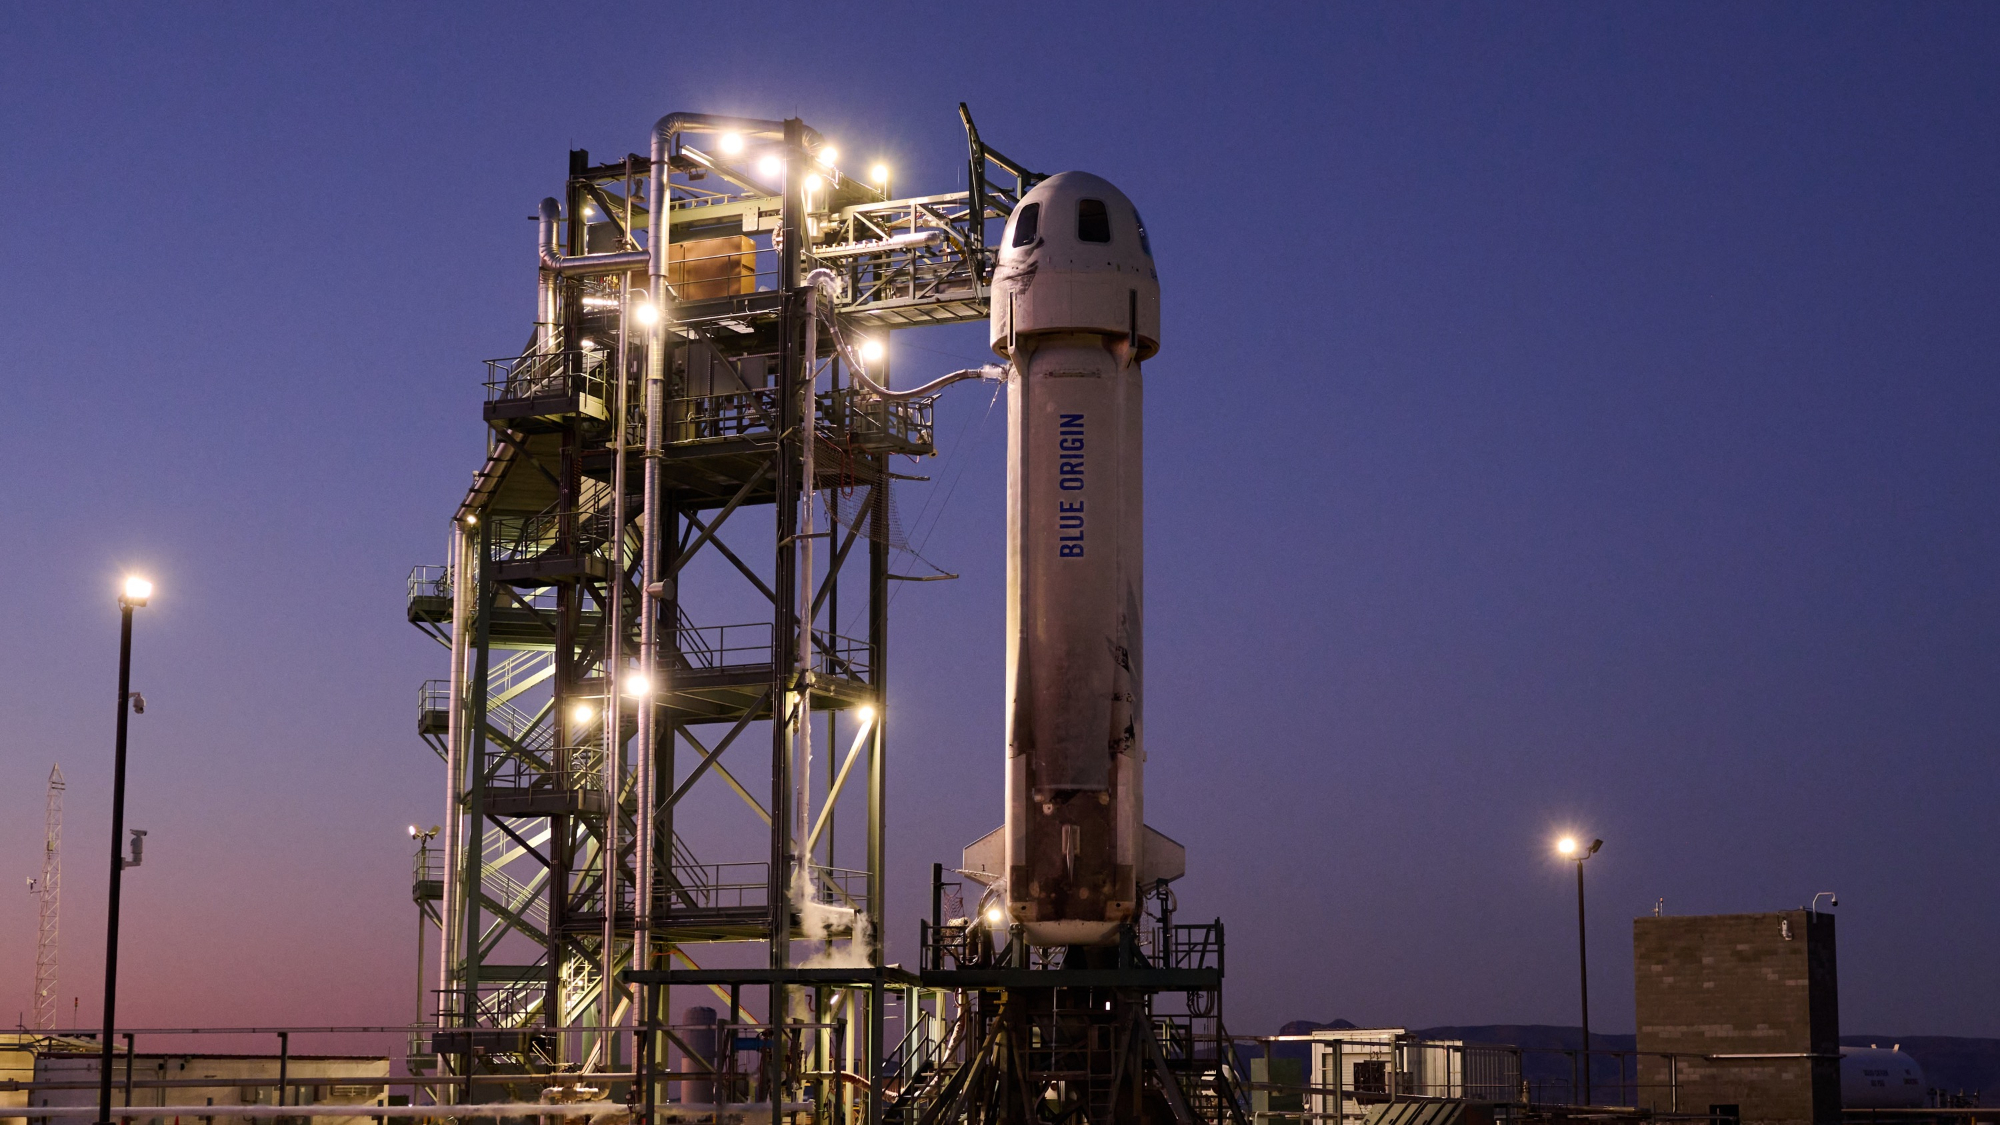 What time is Blue Origin's private NS-25 astronaut launch on May 19?